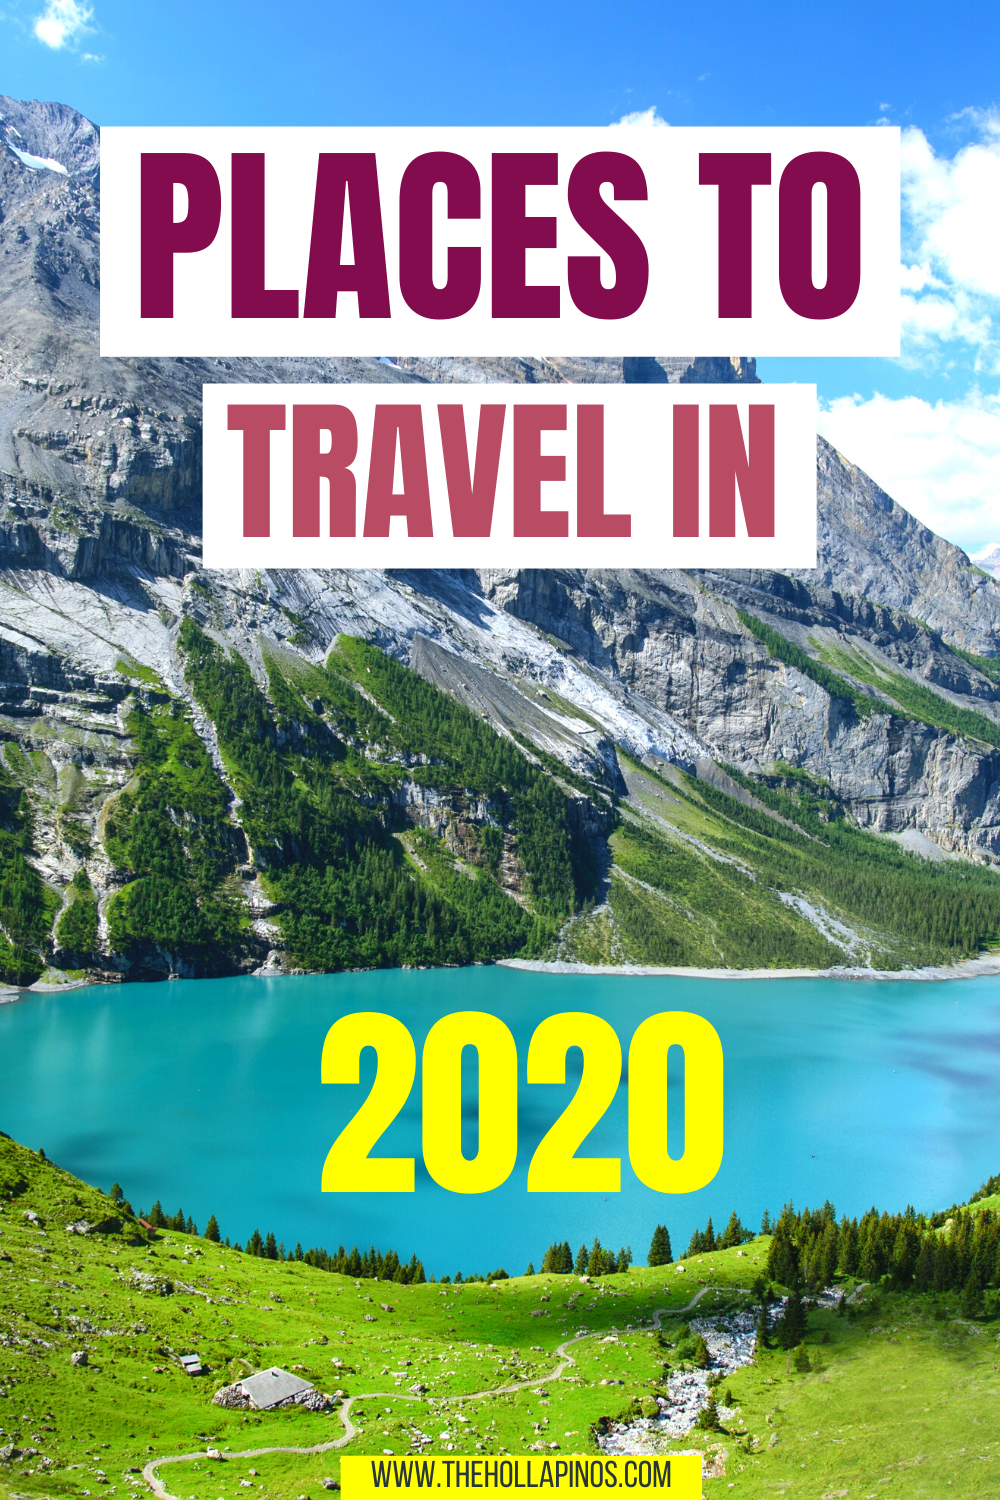 Countries to travel after lockdown due to coronavirus | 2020 Travel Destinations | The Hollapinos -   19 travel destinations Italy things to ideas